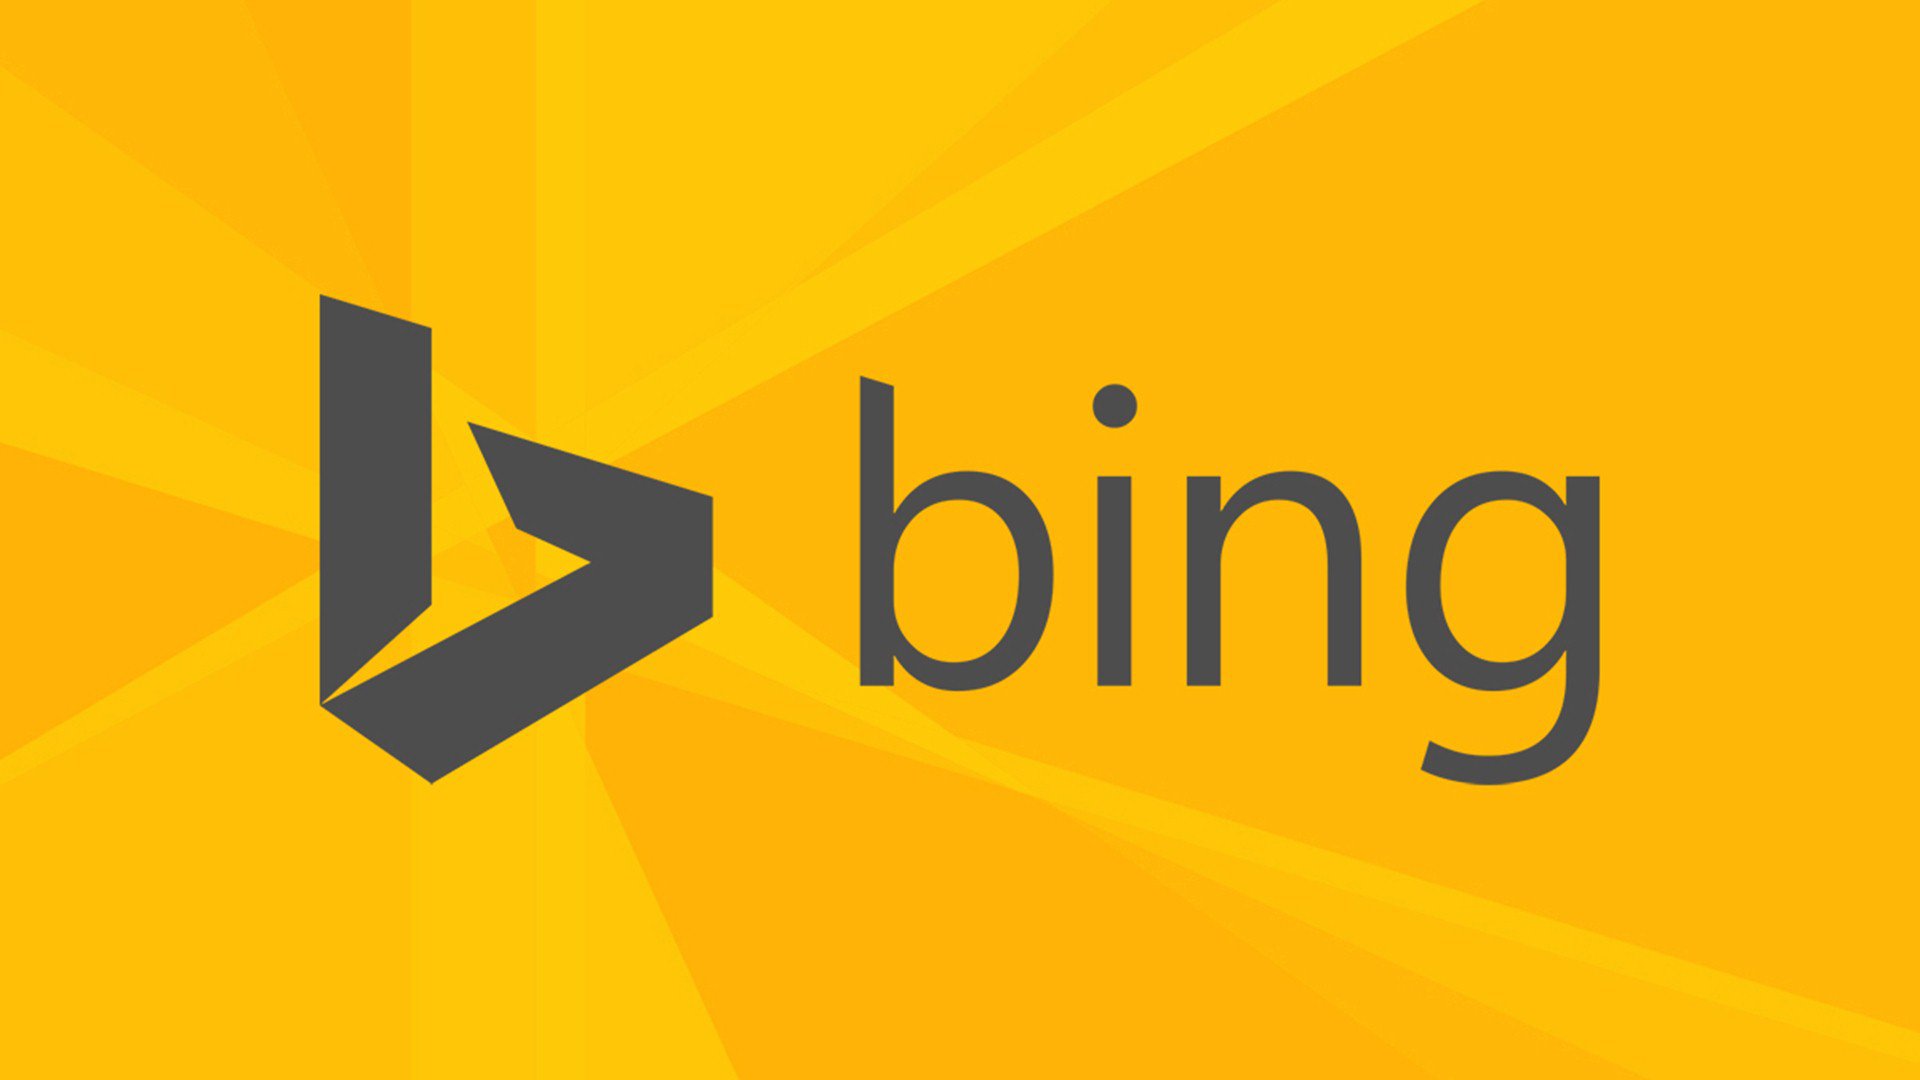 How To Get Daily Bing Image As Wallpaper On Windows